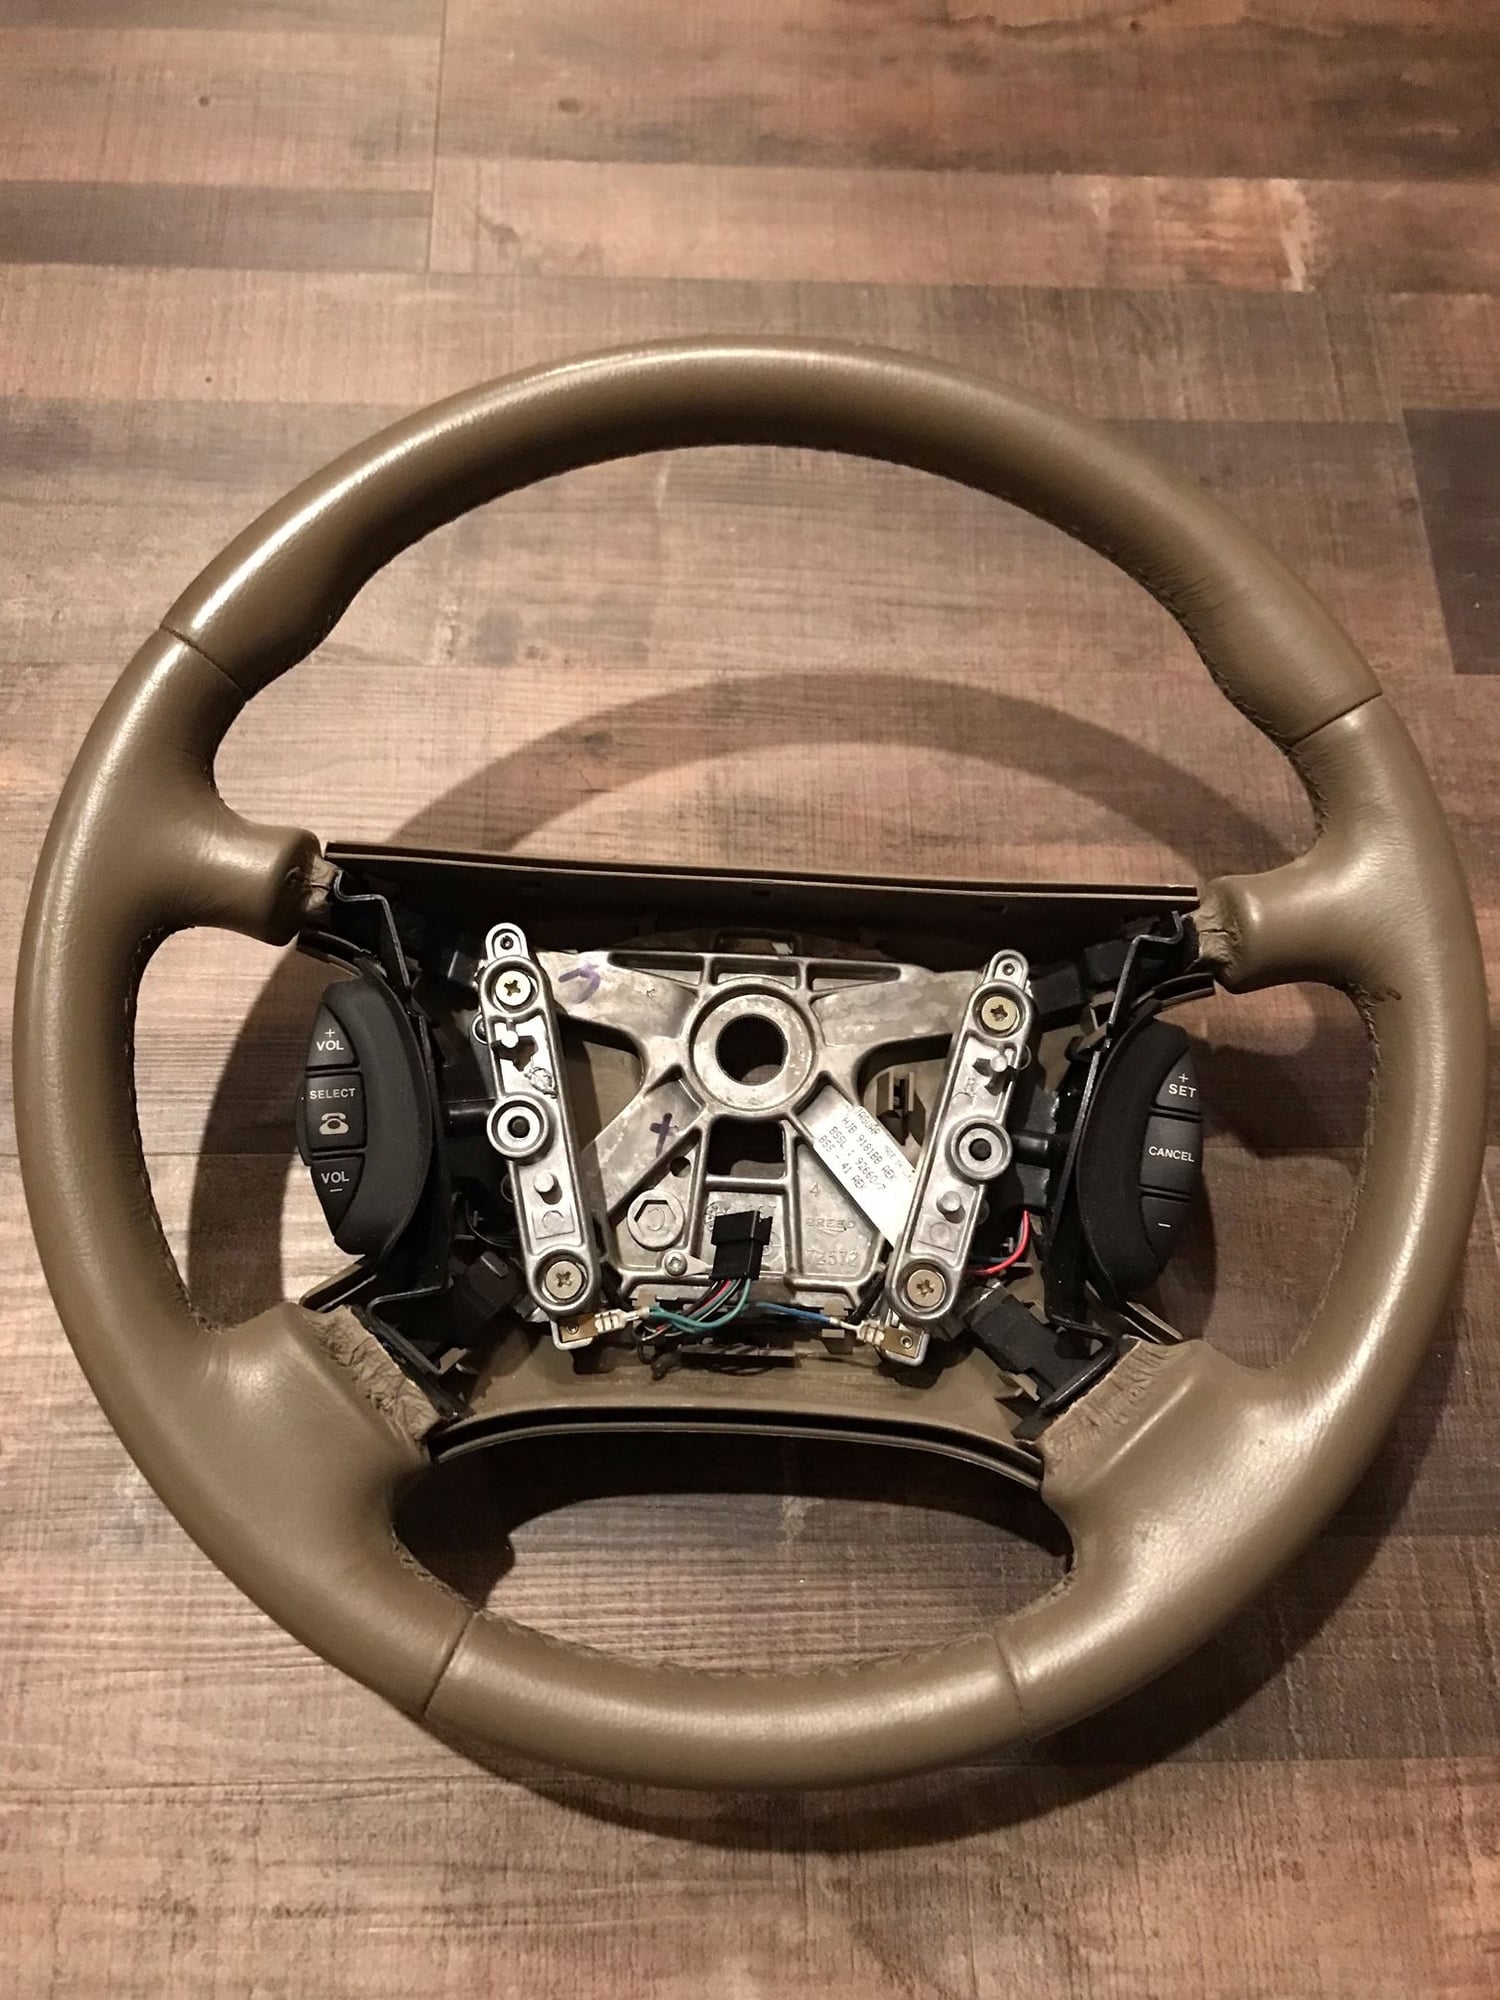 Interior/Upholstery - For Sale Steering Wheels 1997-2006 XK 1998-2003 XJ - Used - 0  All Models - Maryville, TN 37803, United States